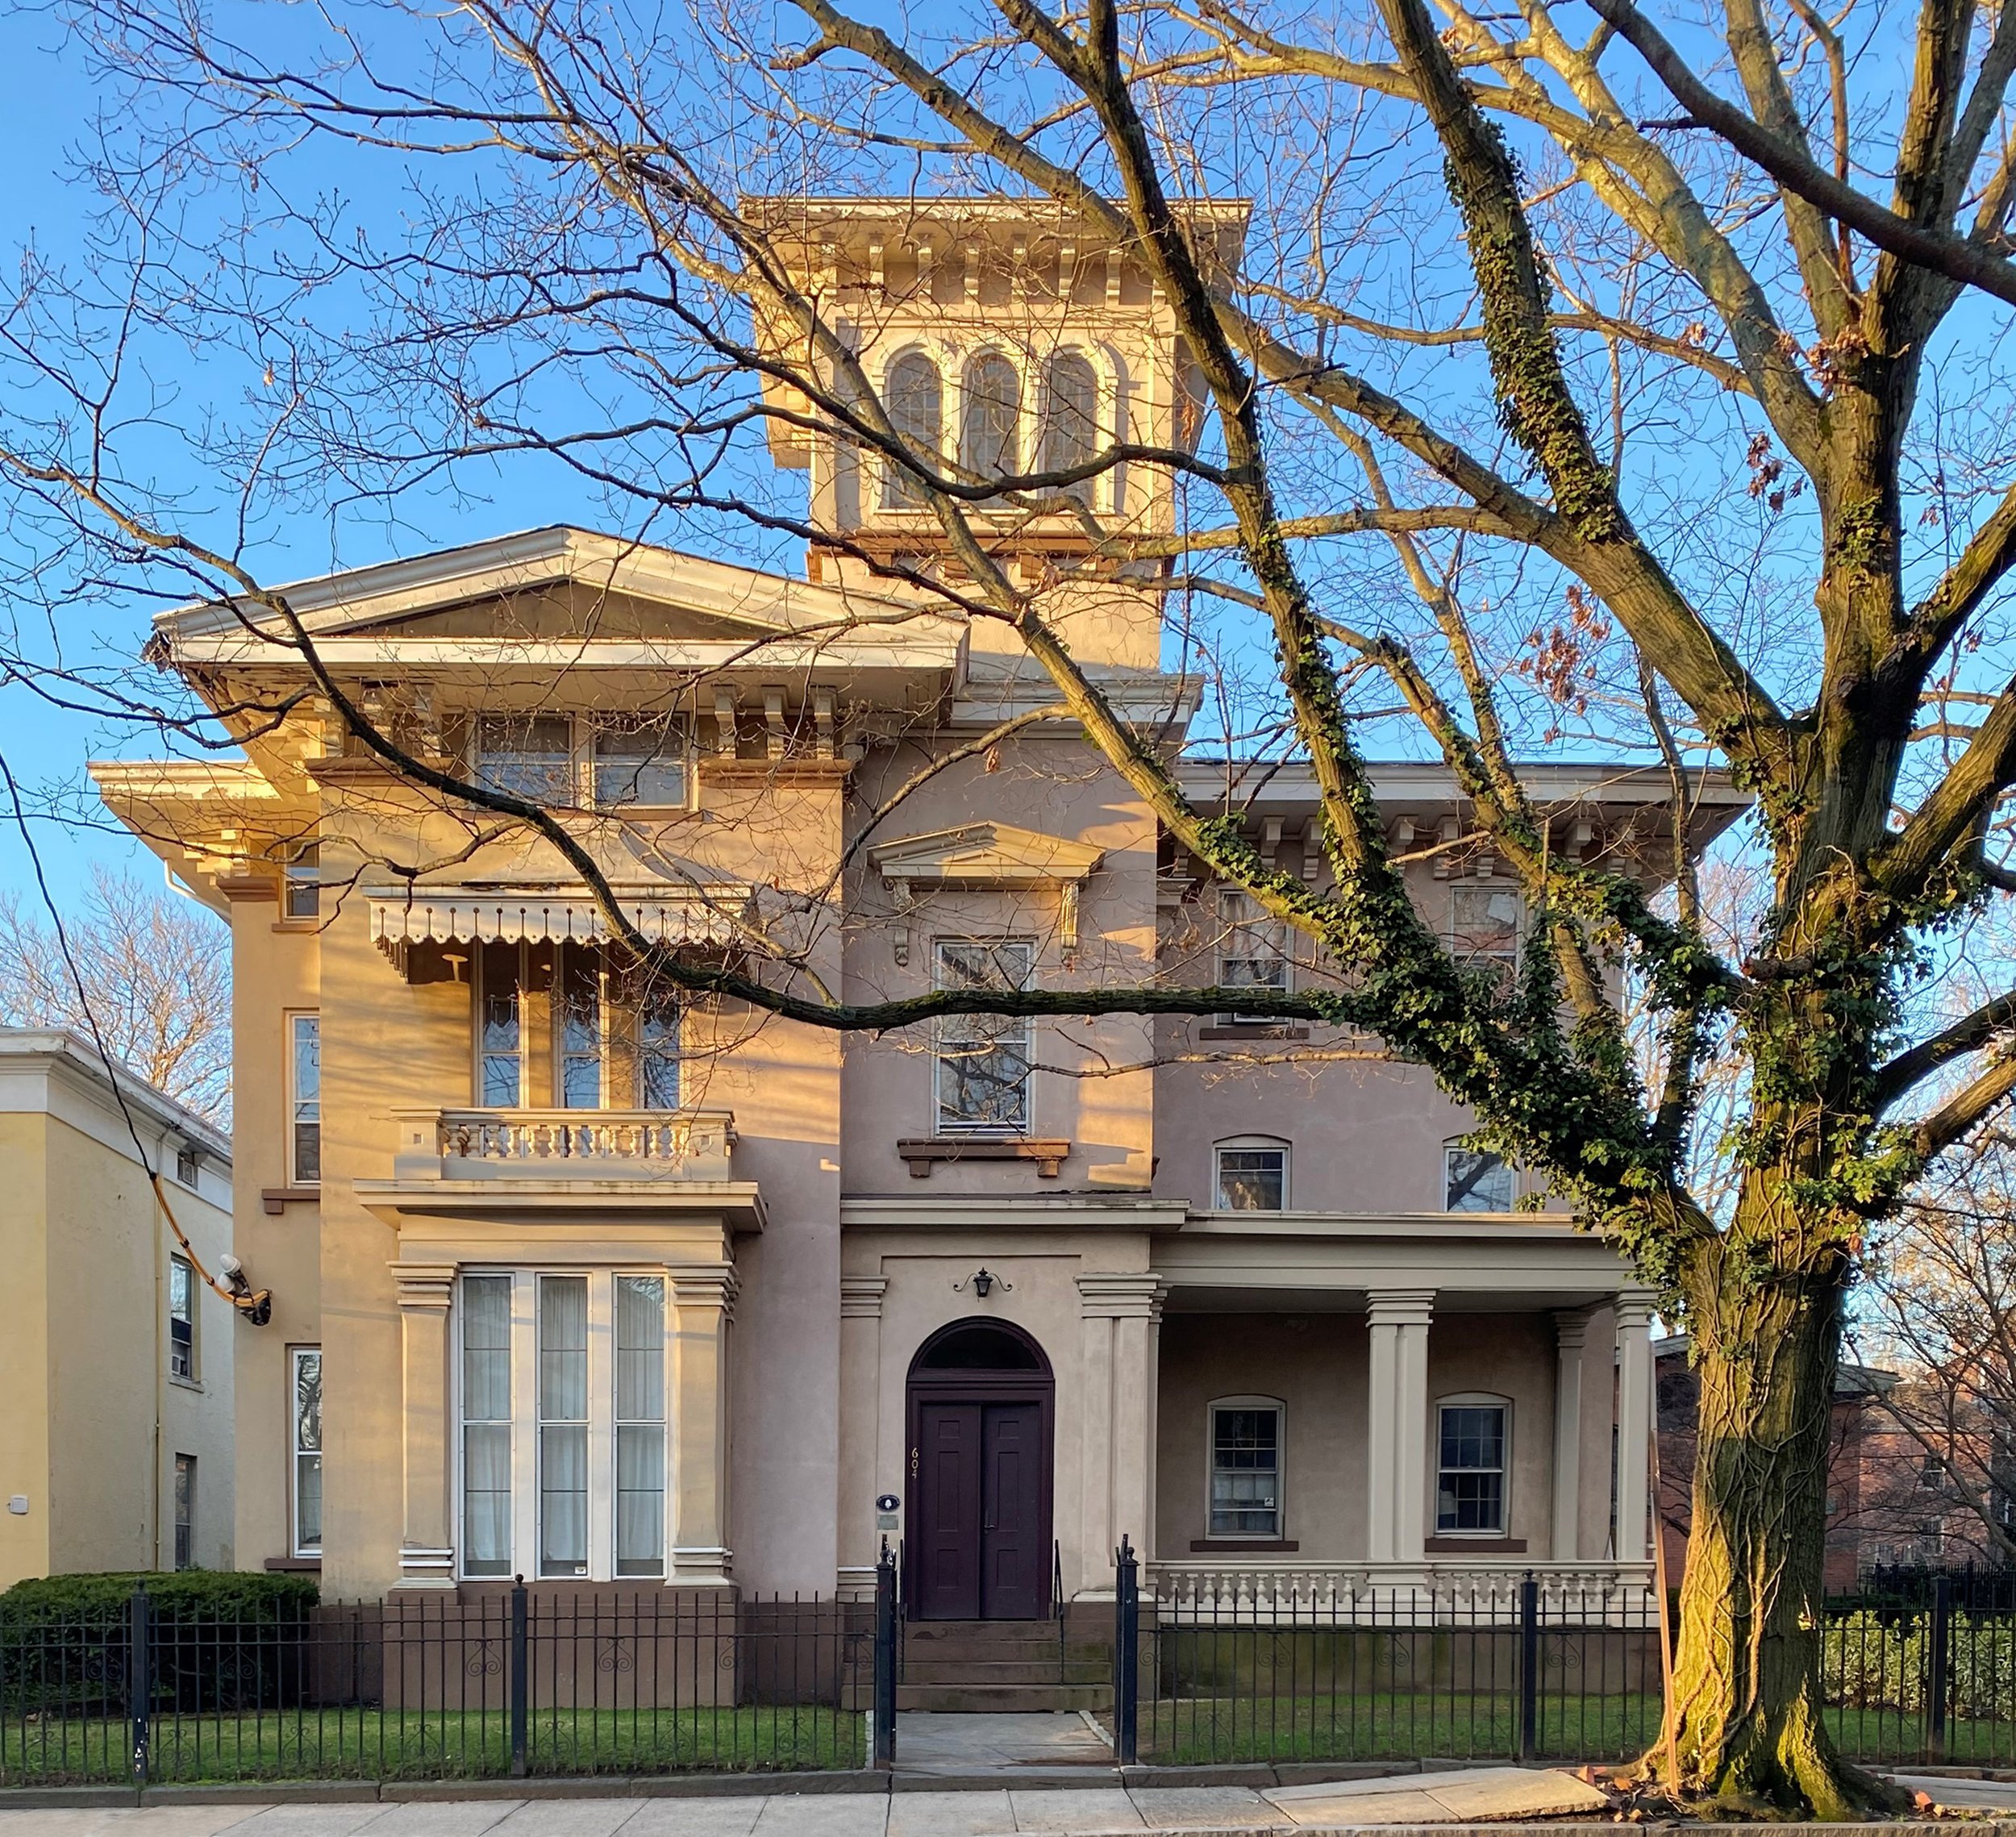 The New Haven Preservation Trust